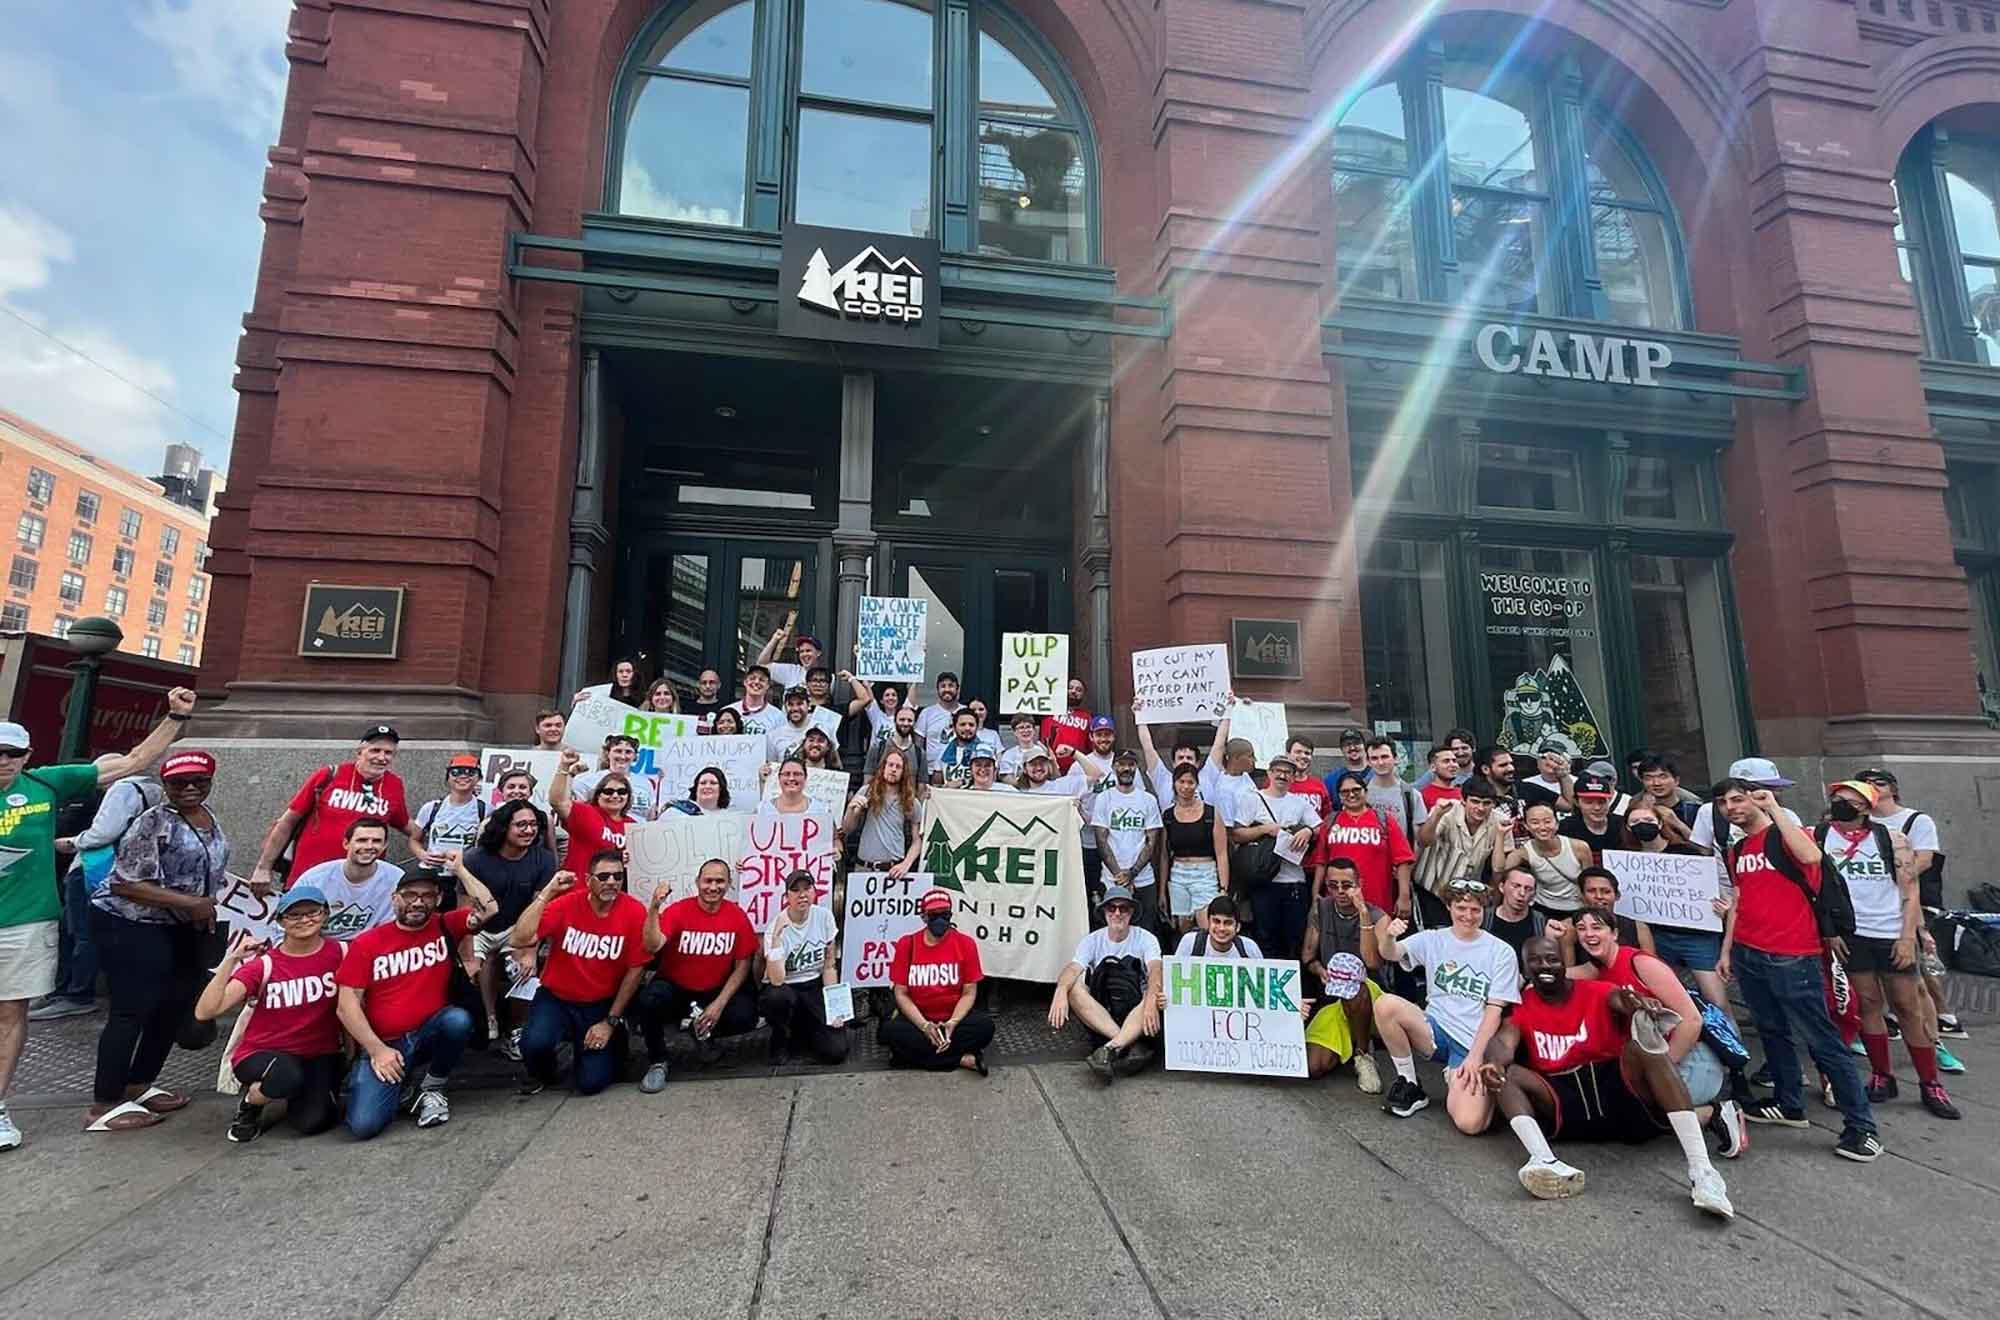 REI SoHo Workers Claim ‘Retaliatory’ Pay Cuts, Walk Out in Protest